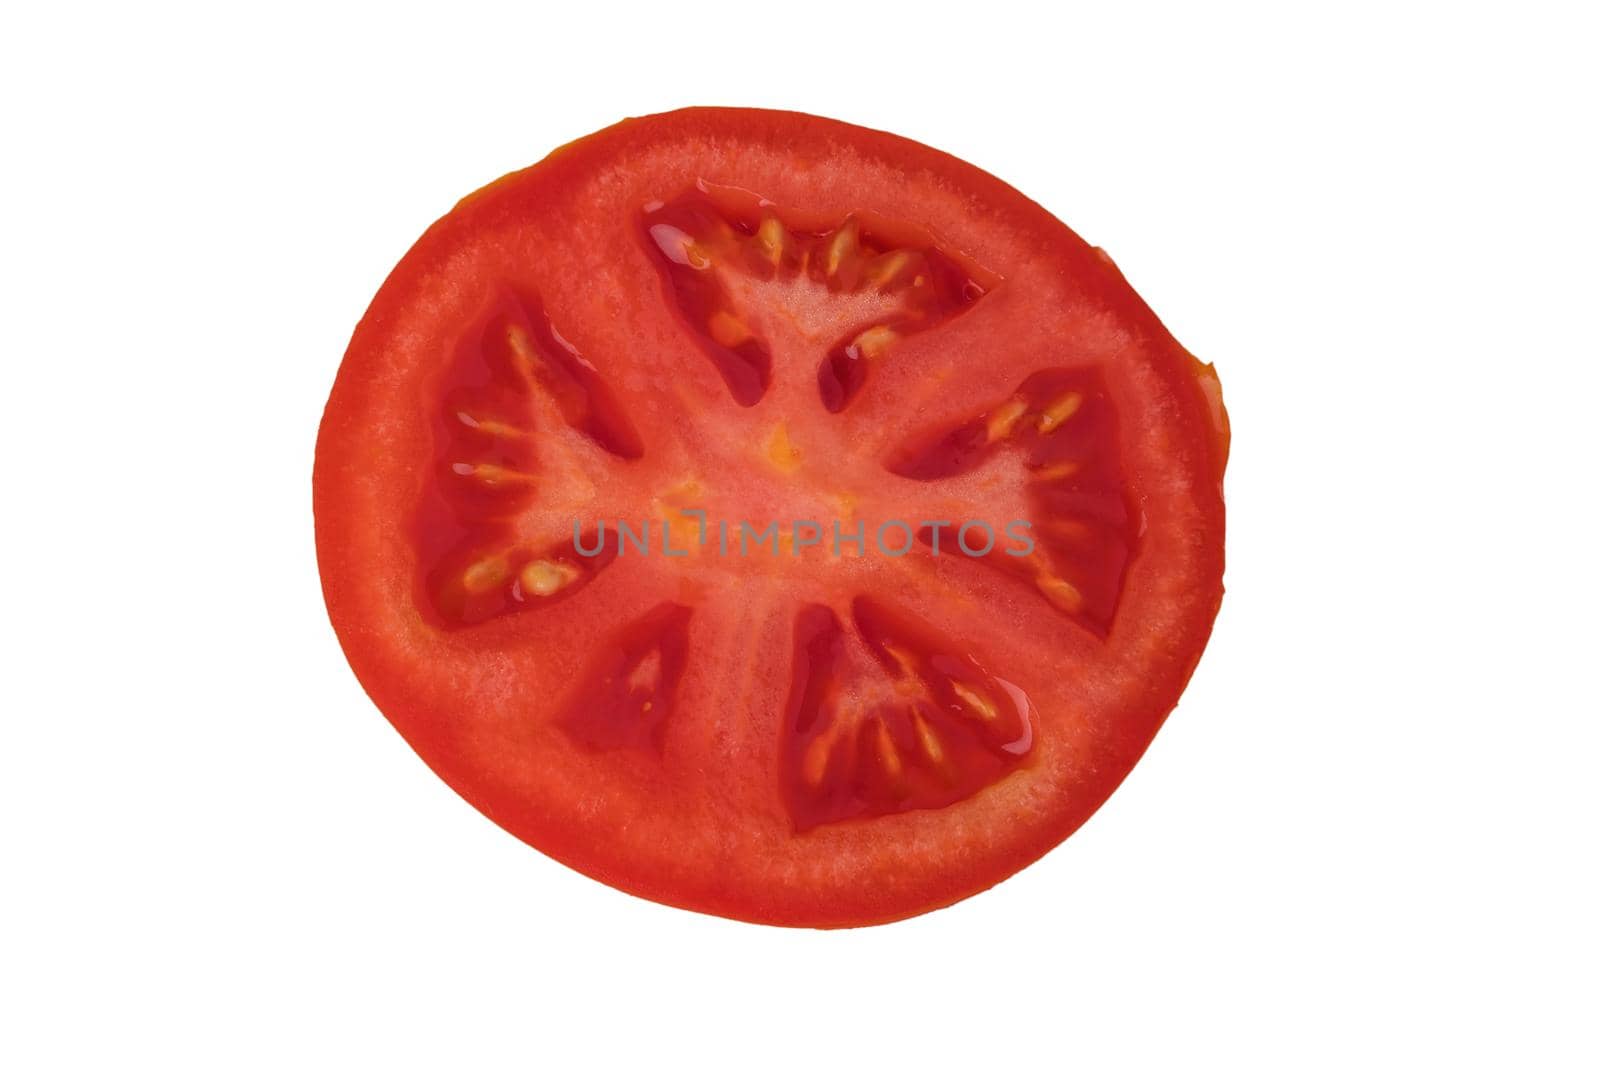 Whole and cut red tomatoes, sliced, sliced on a white plate in isolation by A_A